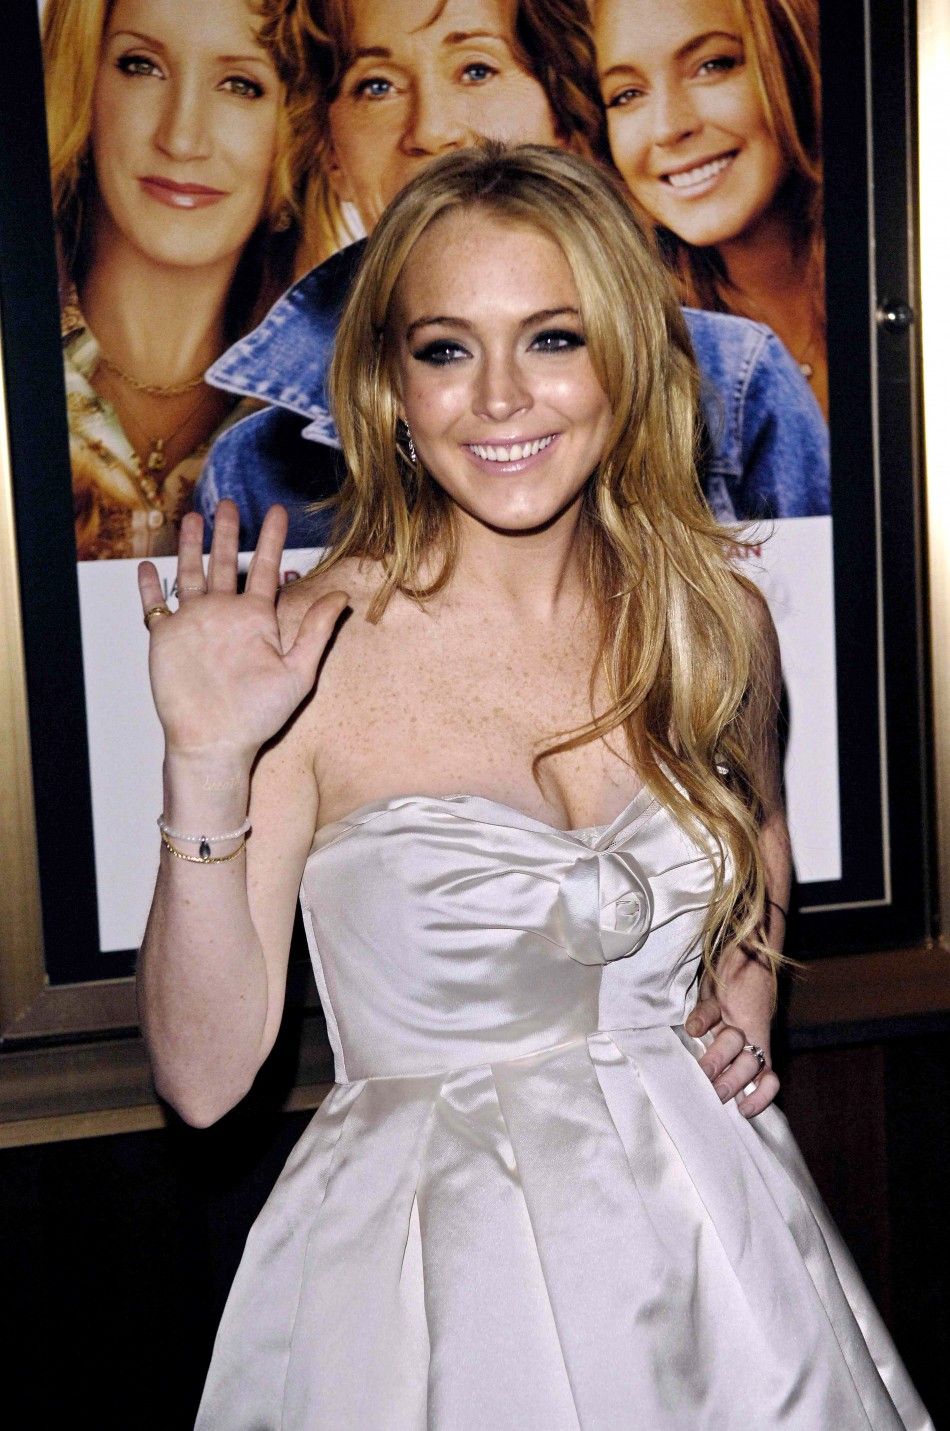 File photo of actress Lindsay Lohan at a film premiere in New York